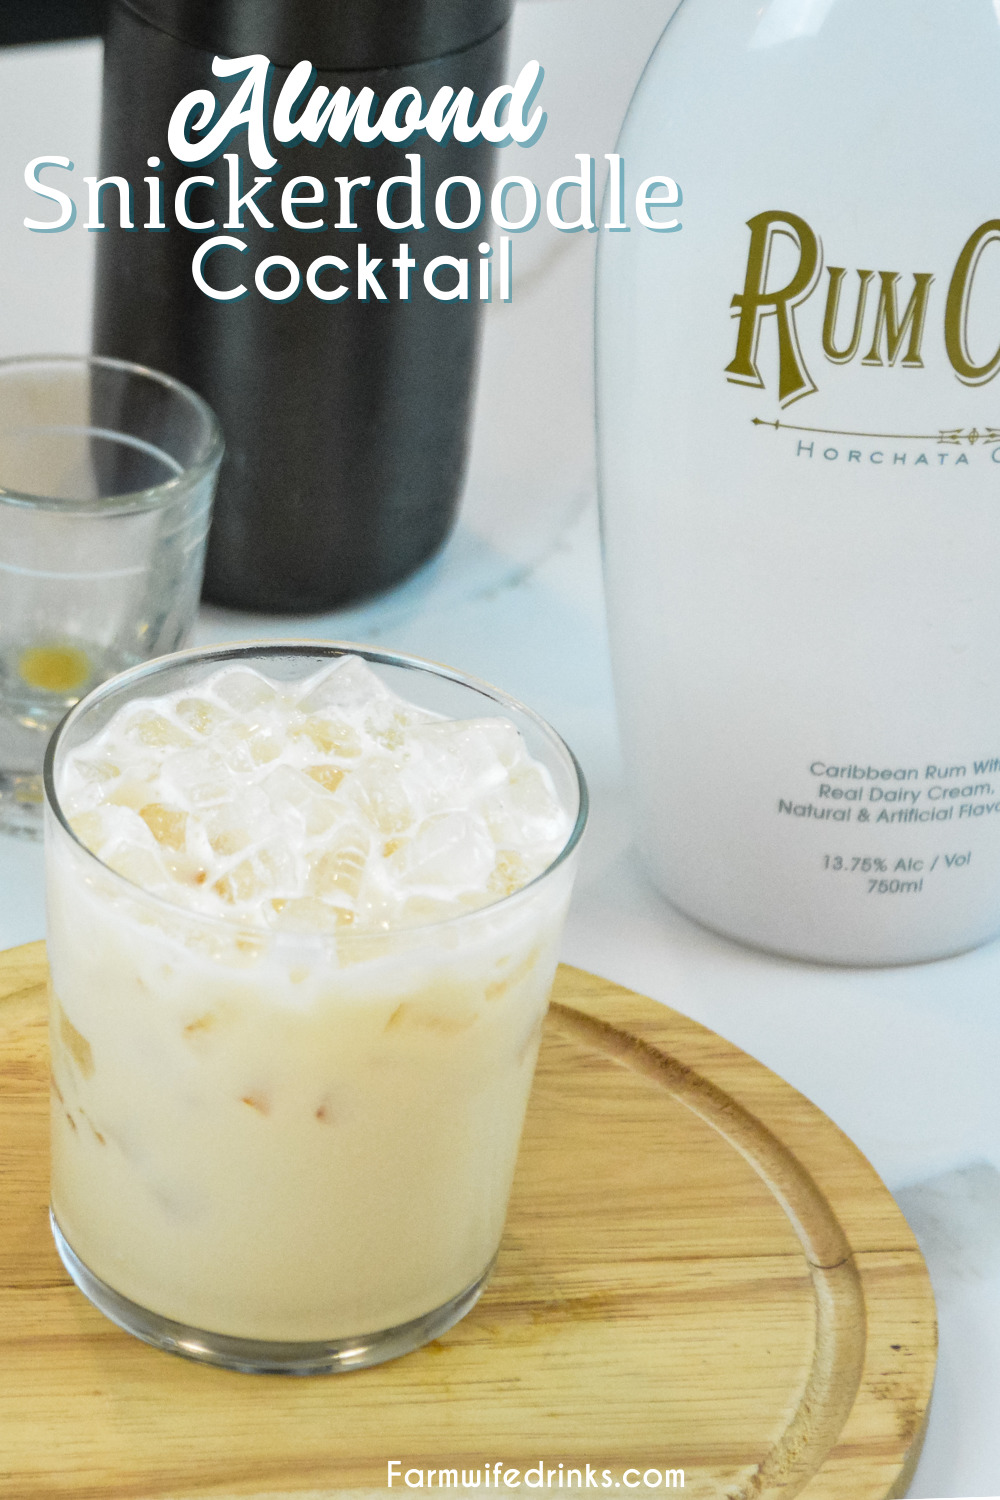 Almond snickerdoodle cocktail is the smooth almond and cinnamon after dinner drink that is made by shaking Rumchata and amaretto together and then serving over ice.